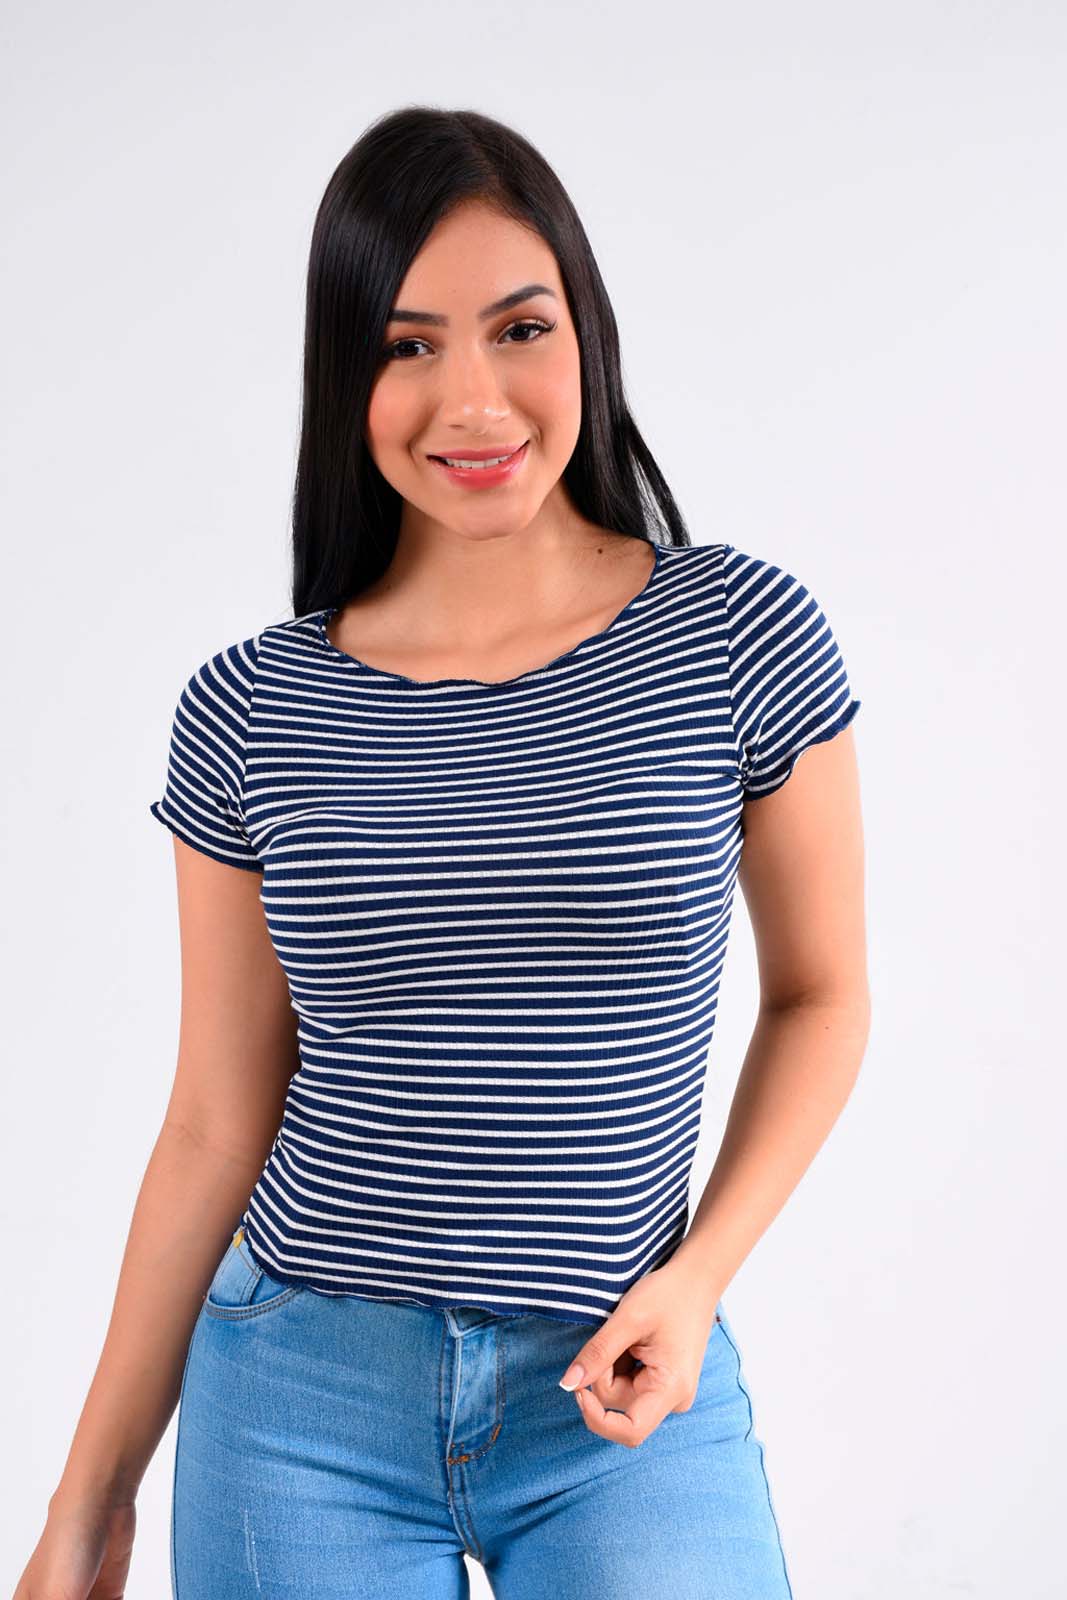 Galaxy Commerce - Blusa para Mujer marca Chica Chic MB2389